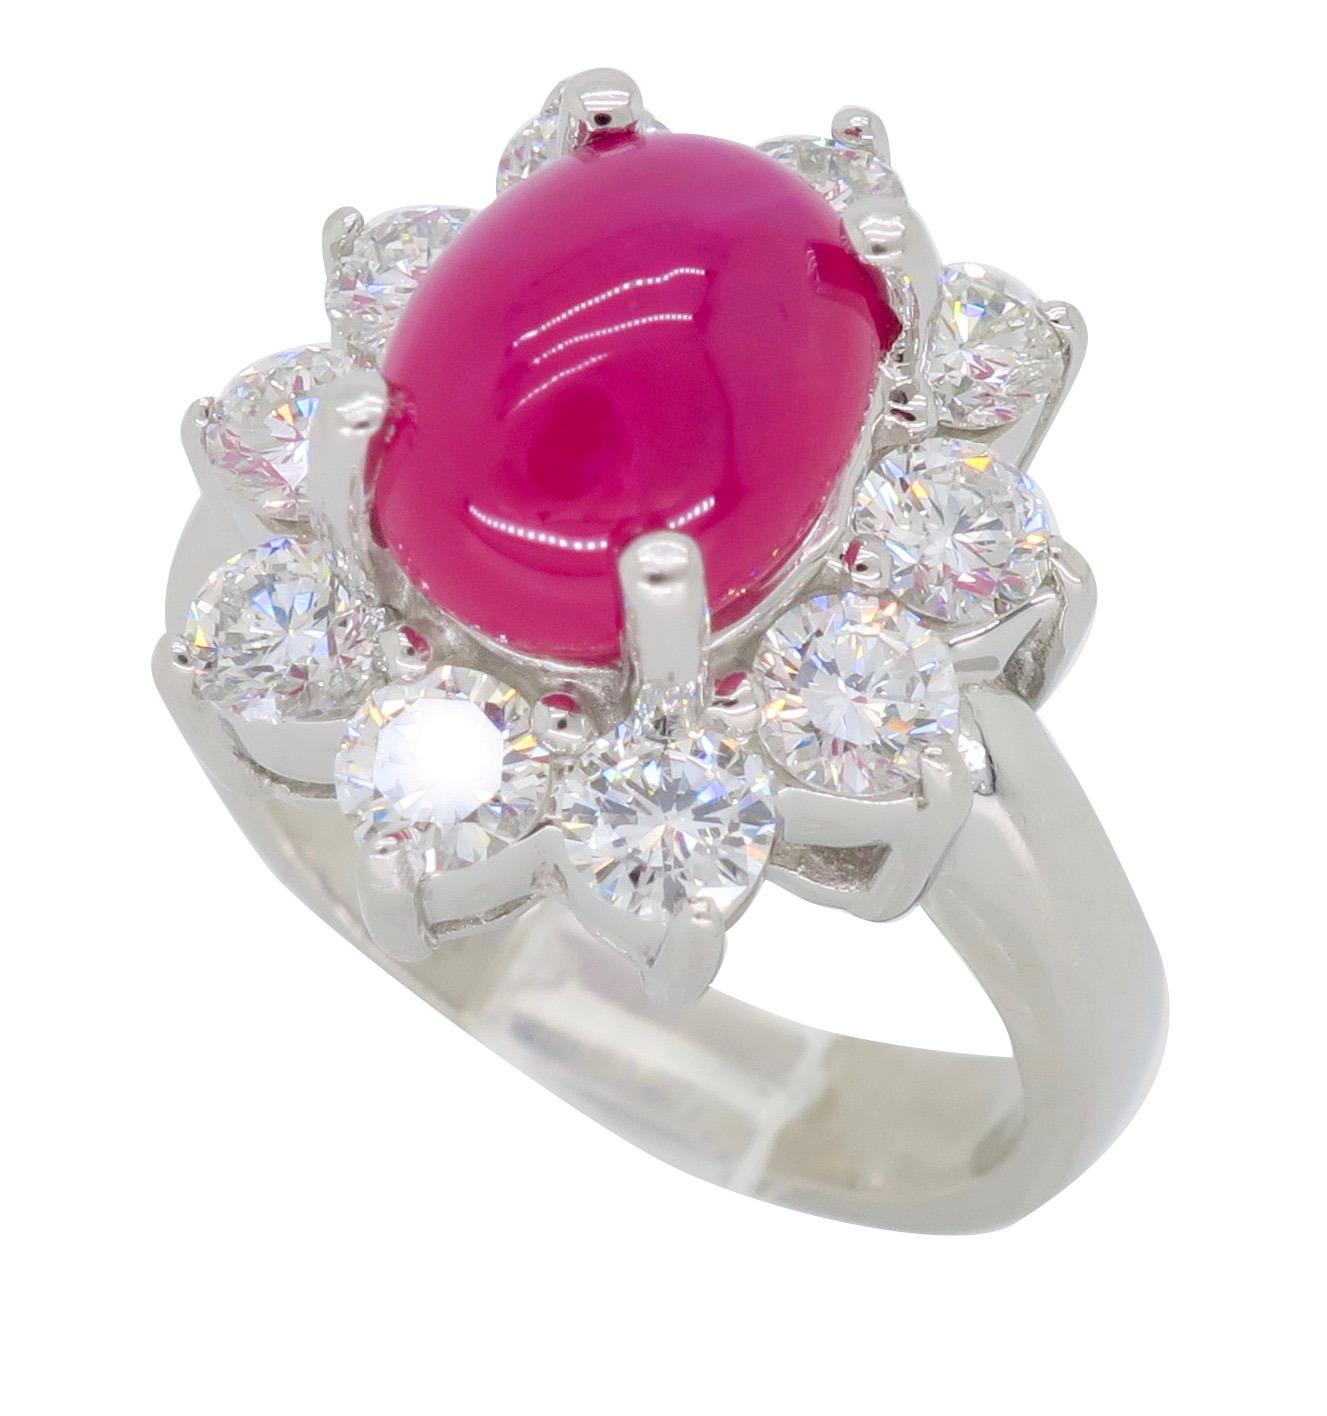 Cabochon Burma Ruby and Diamond Halo Ring in Platinum 5